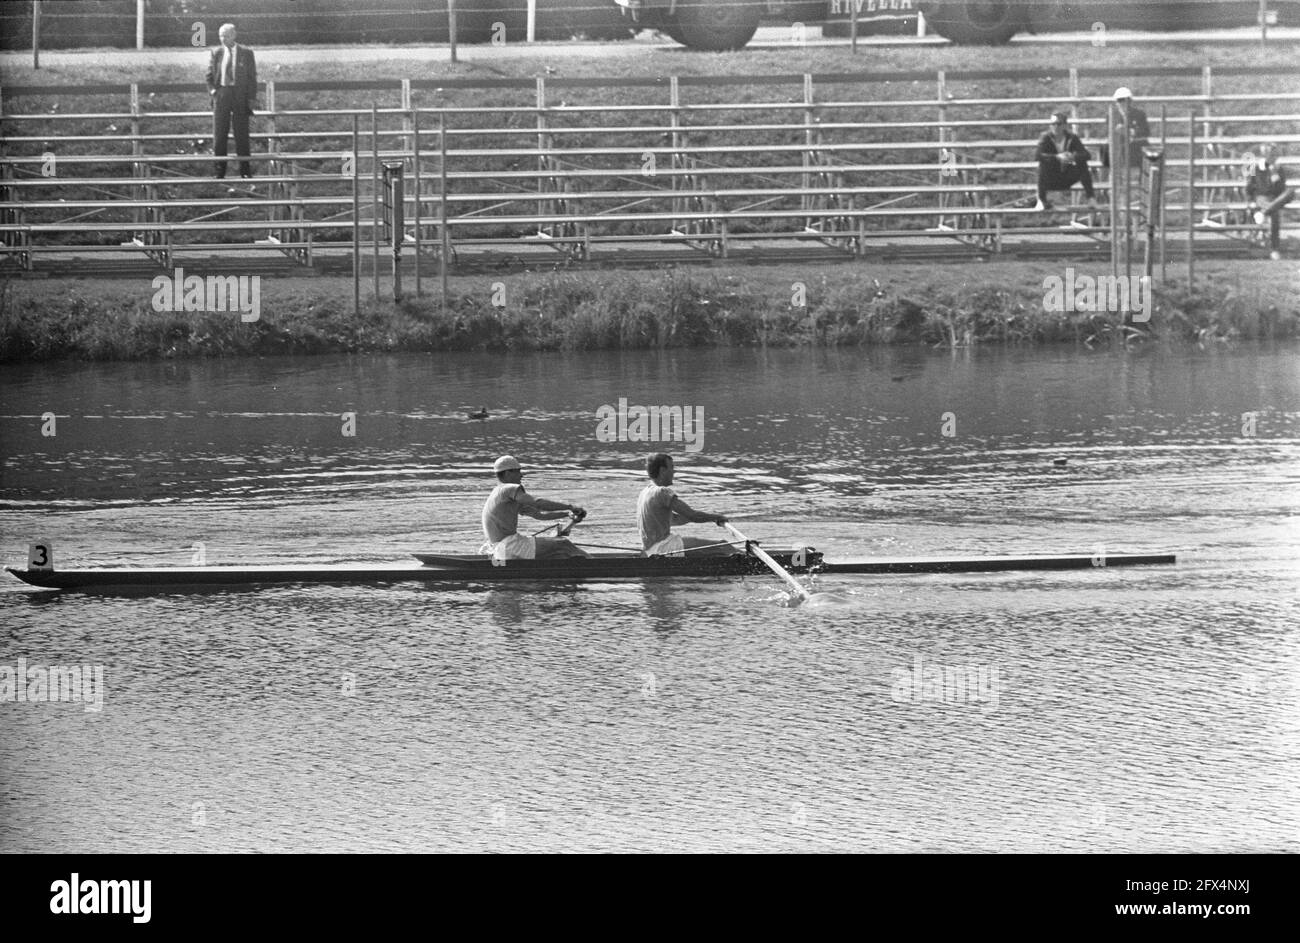 European rowing championships on the Bosbaan, the Netherlands two Blaisse (l) and Veenemans in action, August 6, 1964, Rowing, championships, The Netherlands, 20th century press agency photo, news to remember, documentary, historic photography 1945-1990, visual stories, human history of the Twentieth Century, capturing moments in time Stock Photo